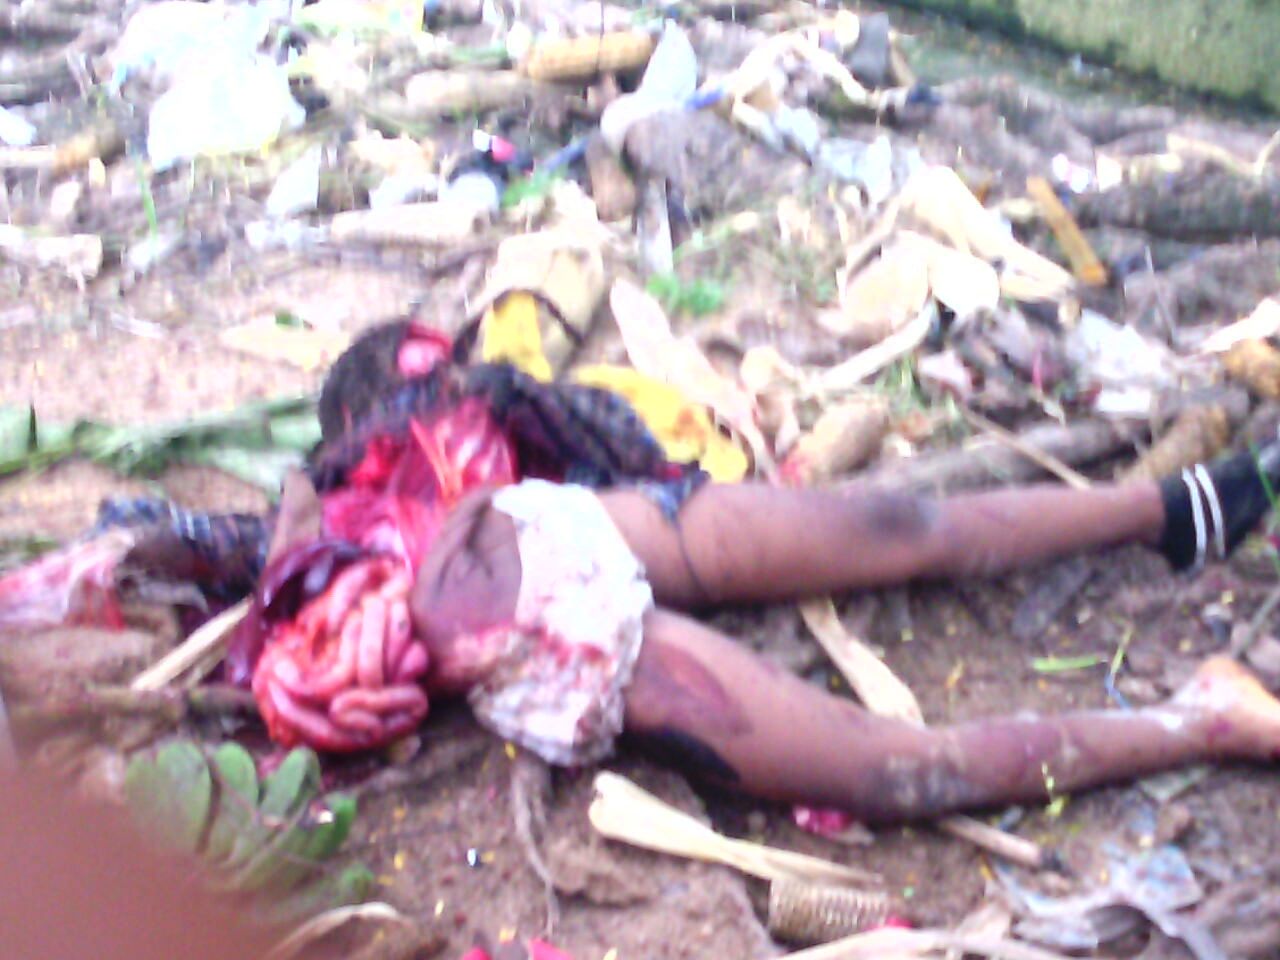 Apprentice Mechanic Crushes 1 Student 2 Death,Injures 2 In Calabar Accident(pics - Travel - N...